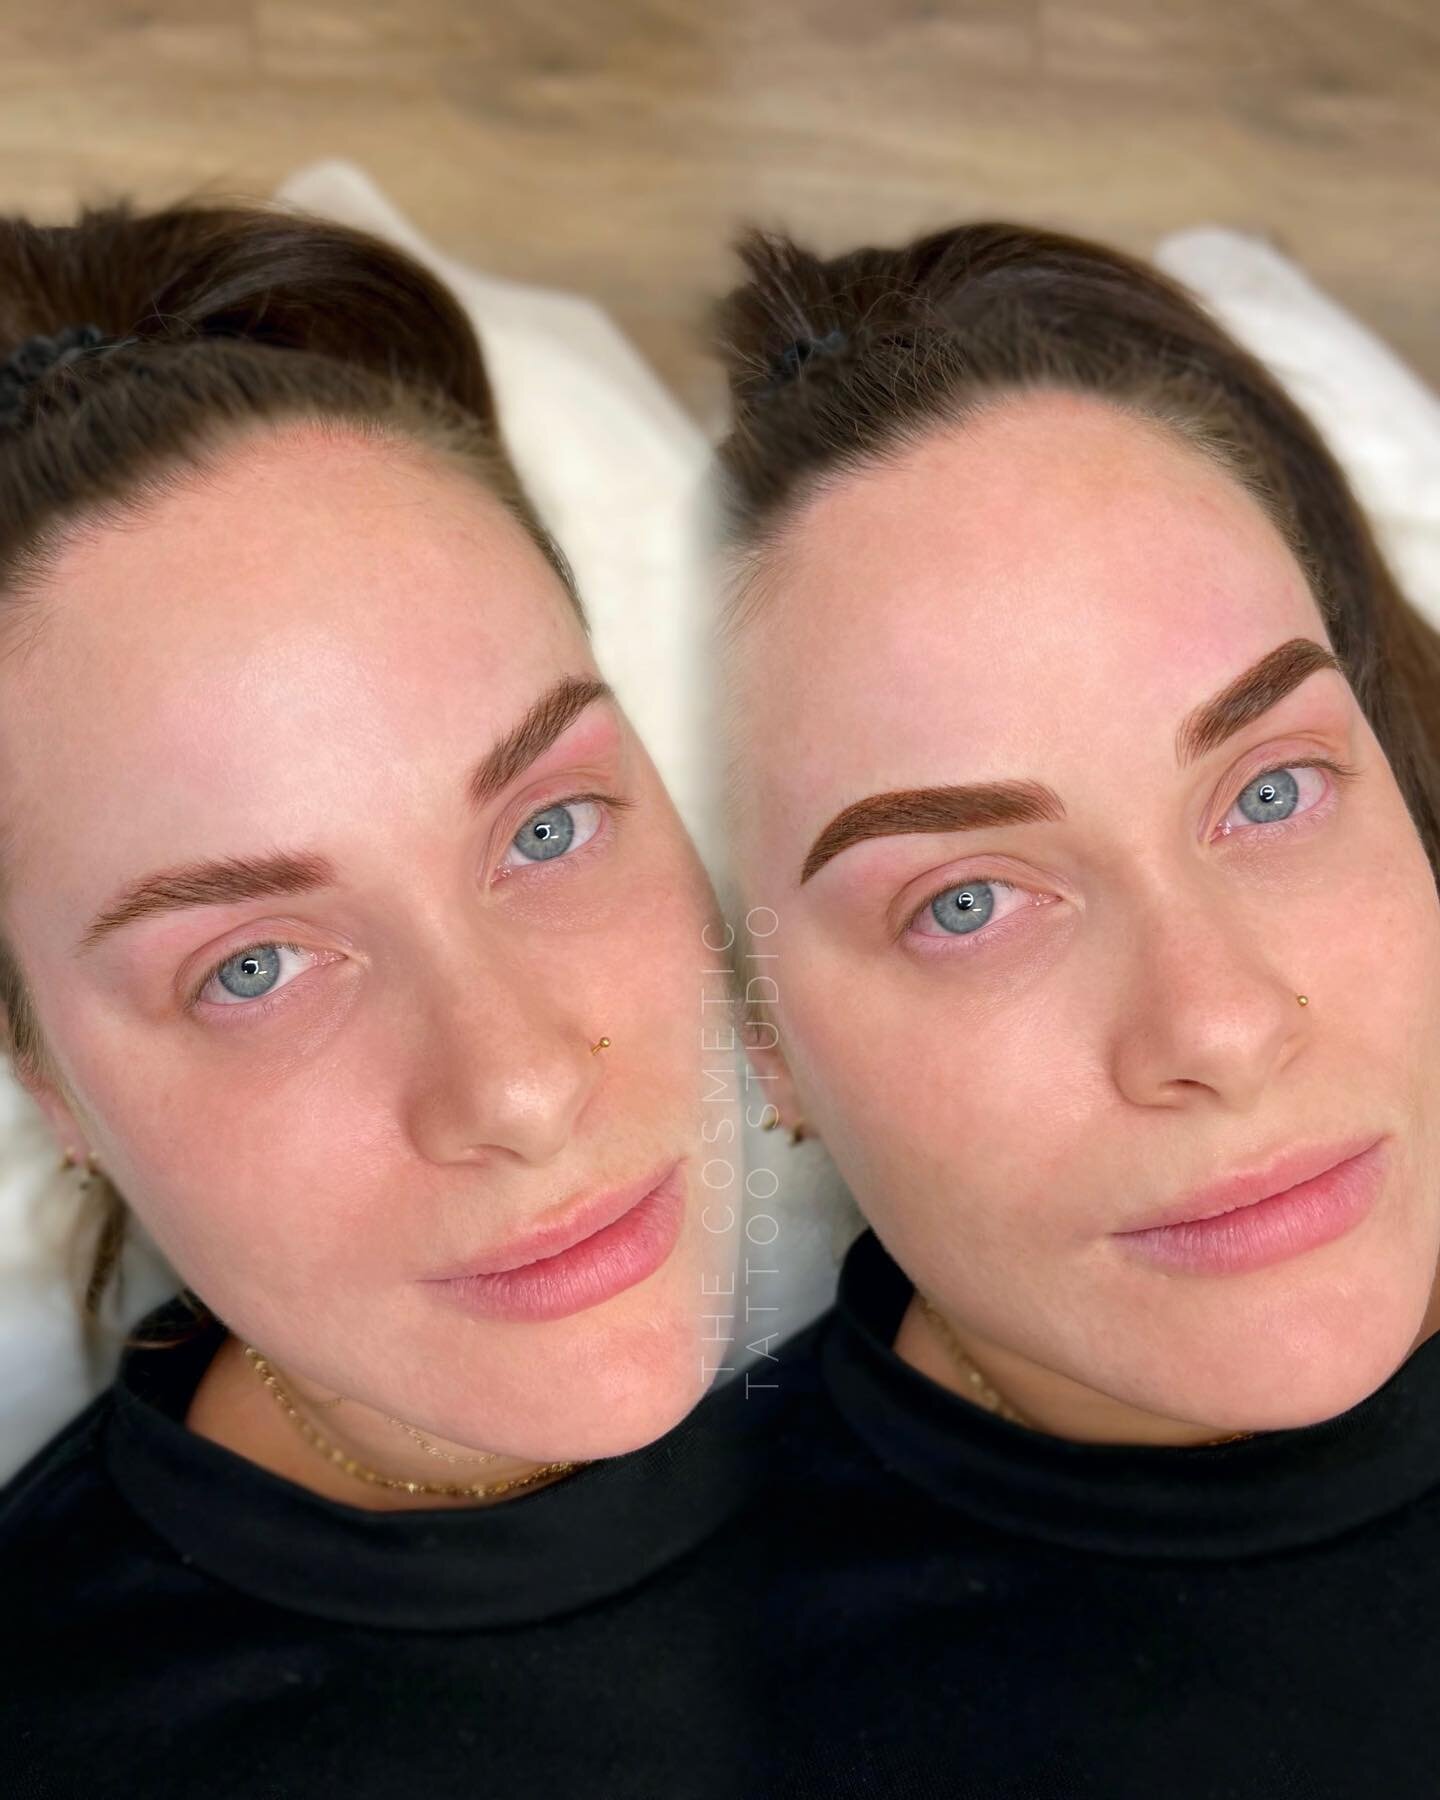 Before/after fuller style combination brows over previous tattoo ✨🙌 

I am obsessed with this transformation!

If you have previous tattooing that you would like reworked, please send through a photo or come in for a free consultation so we can revi